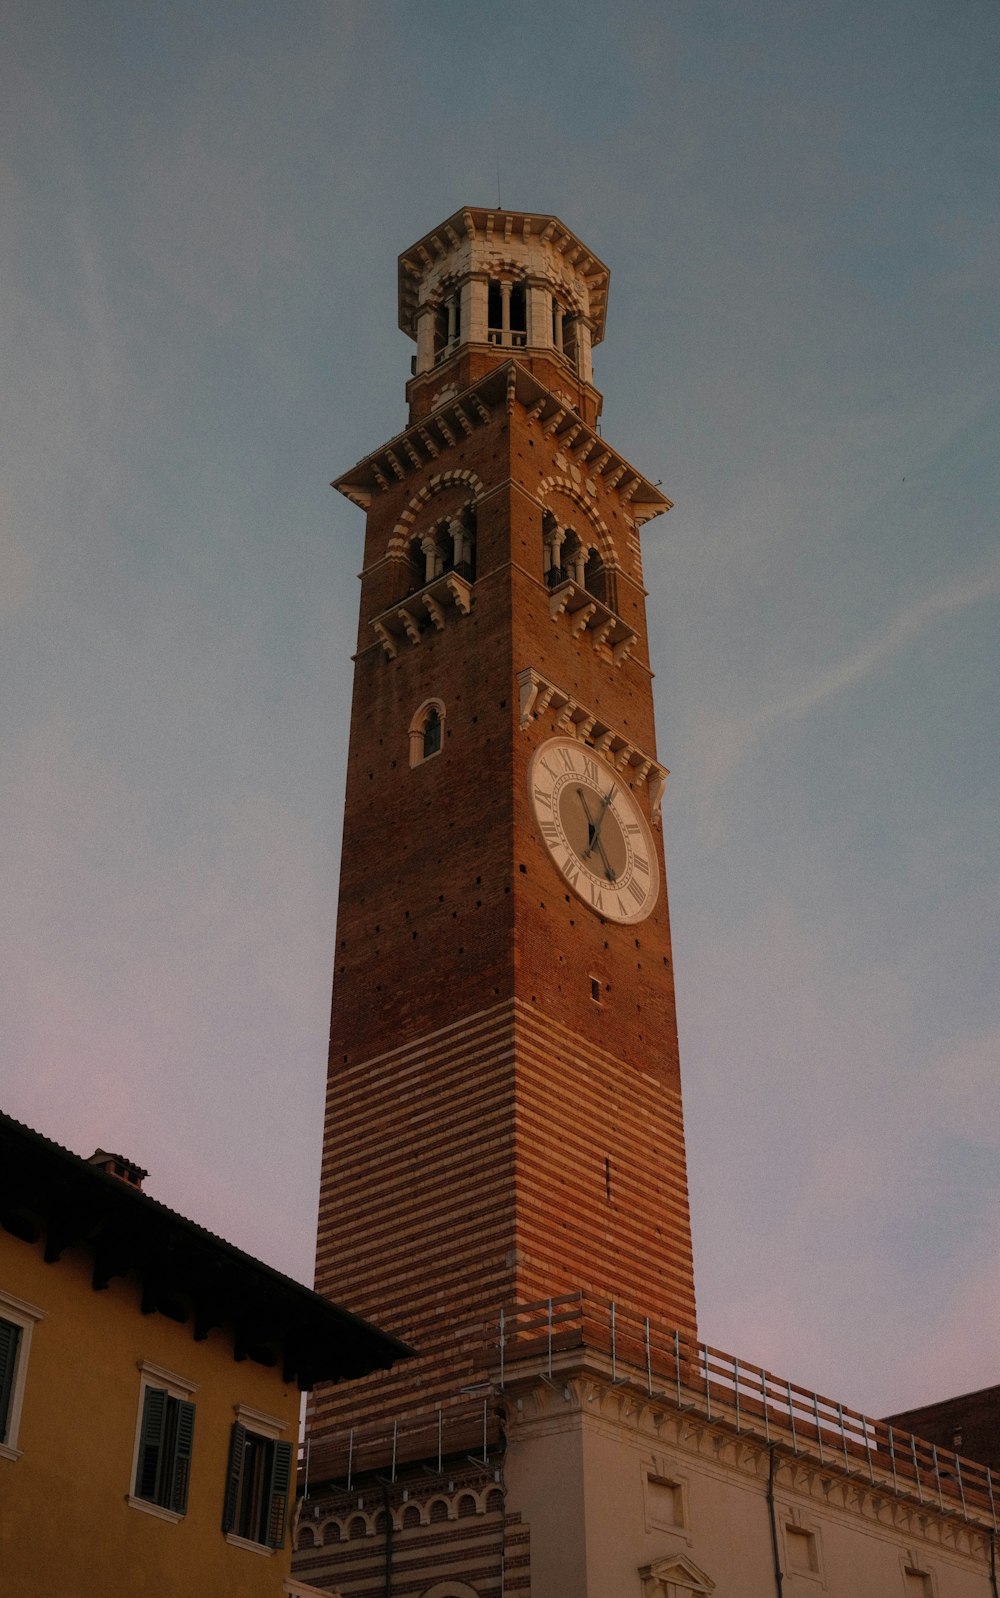 a tall brick clock tower with a clock on each of it's sides